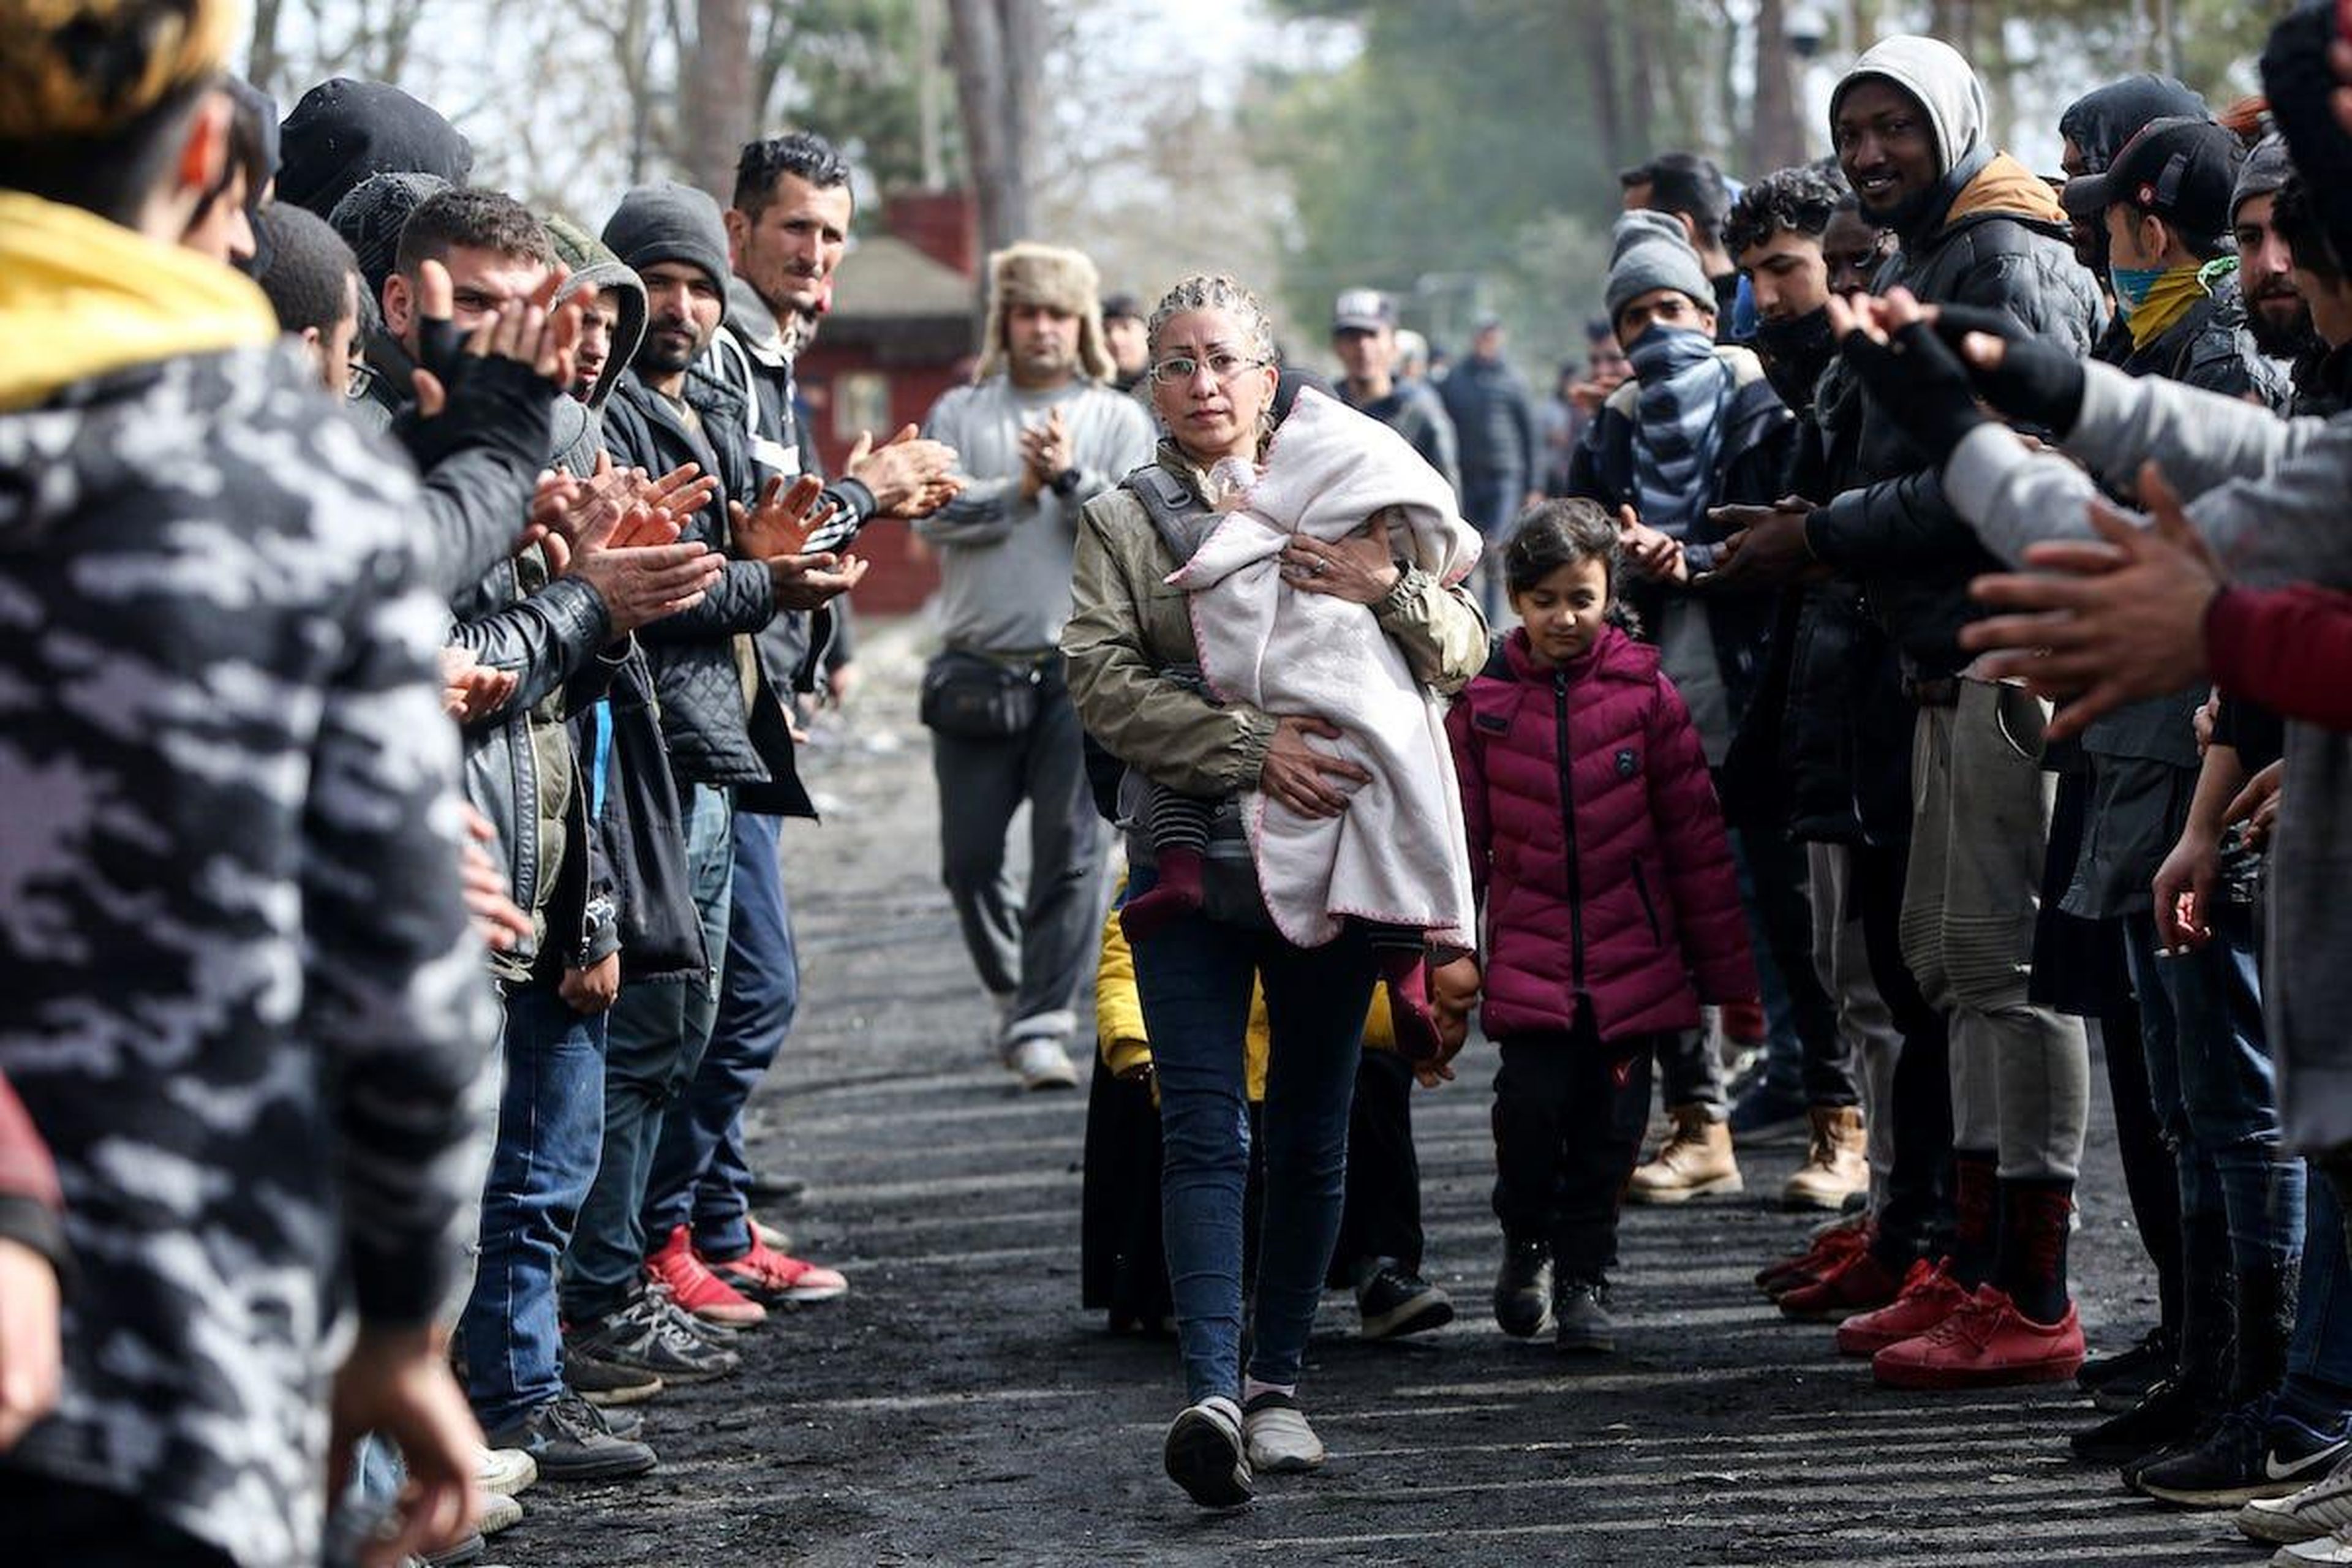 Women Asylum Seekers, waiting at Turkey's Pazarkule border crossing to reach Europe, stage a demonstration at the buffer zone demanding to open the gate during International Women's Day.